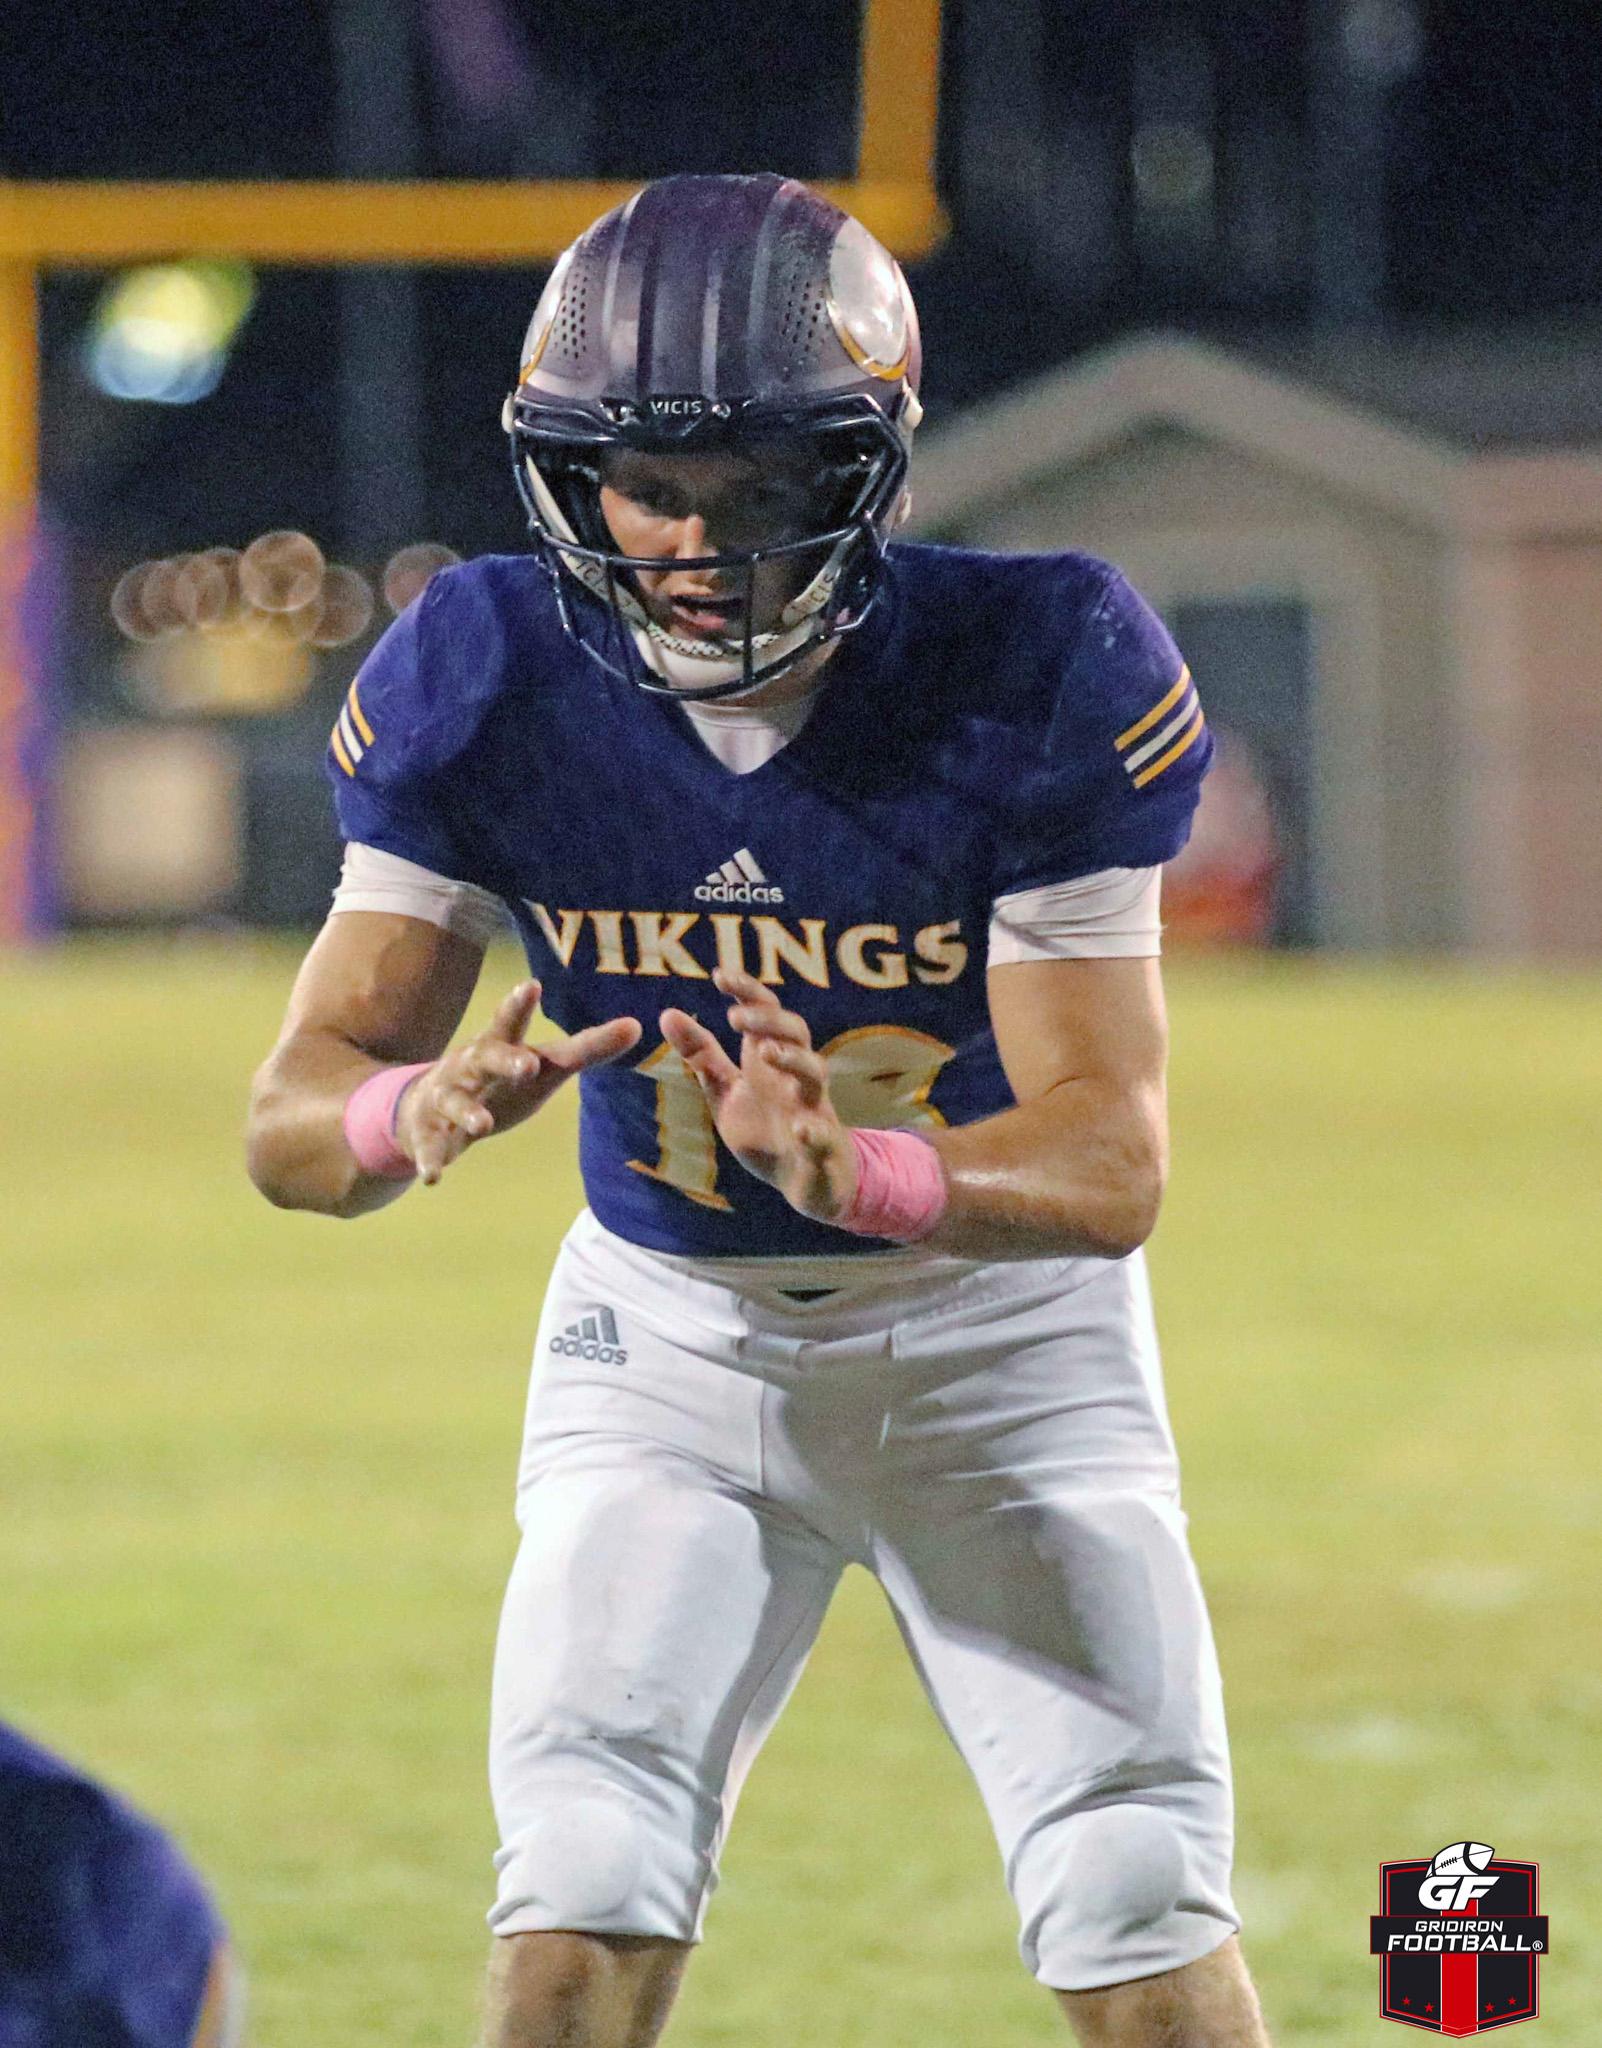 Opelousas Catholic QB Mark Collins Accounts for 6 TDs as the Vikings Roll Over Westminster Christian Academy 41-6